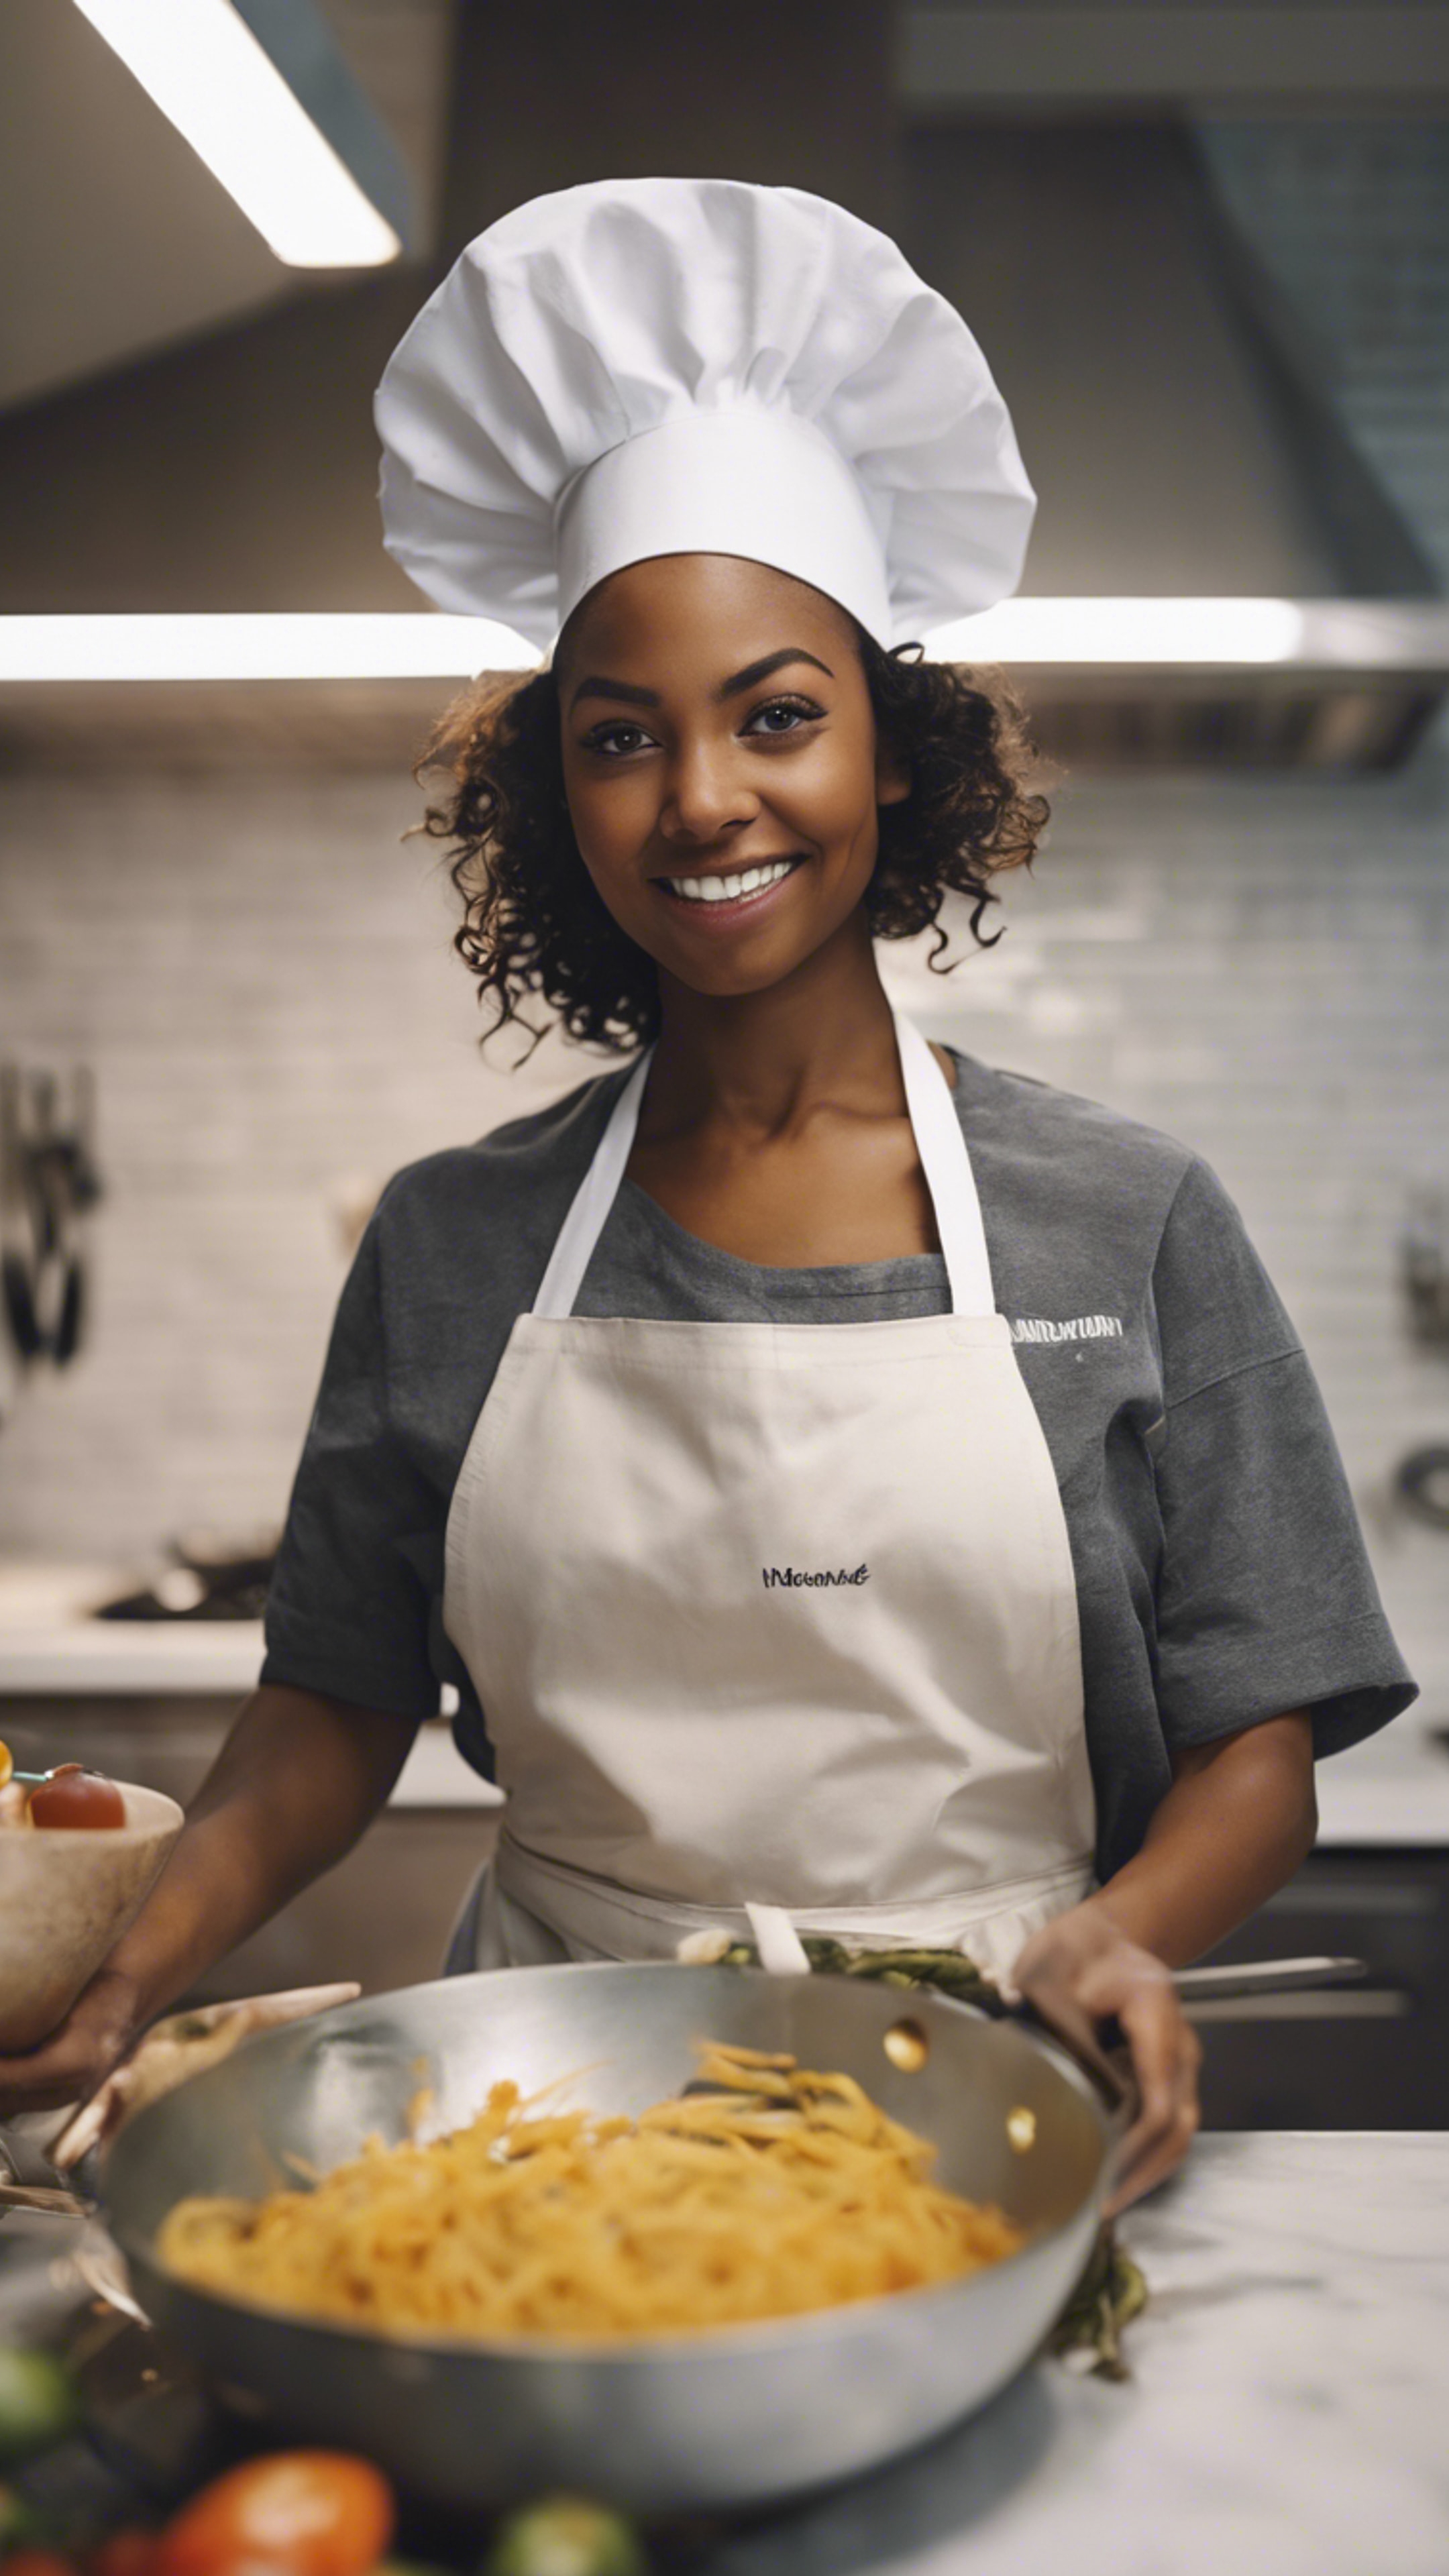 An enthusiastic black girl wearing chef’s hat and apron cooking in a modern kitchen. Tapéta[28127f79c89b4e3a826e]